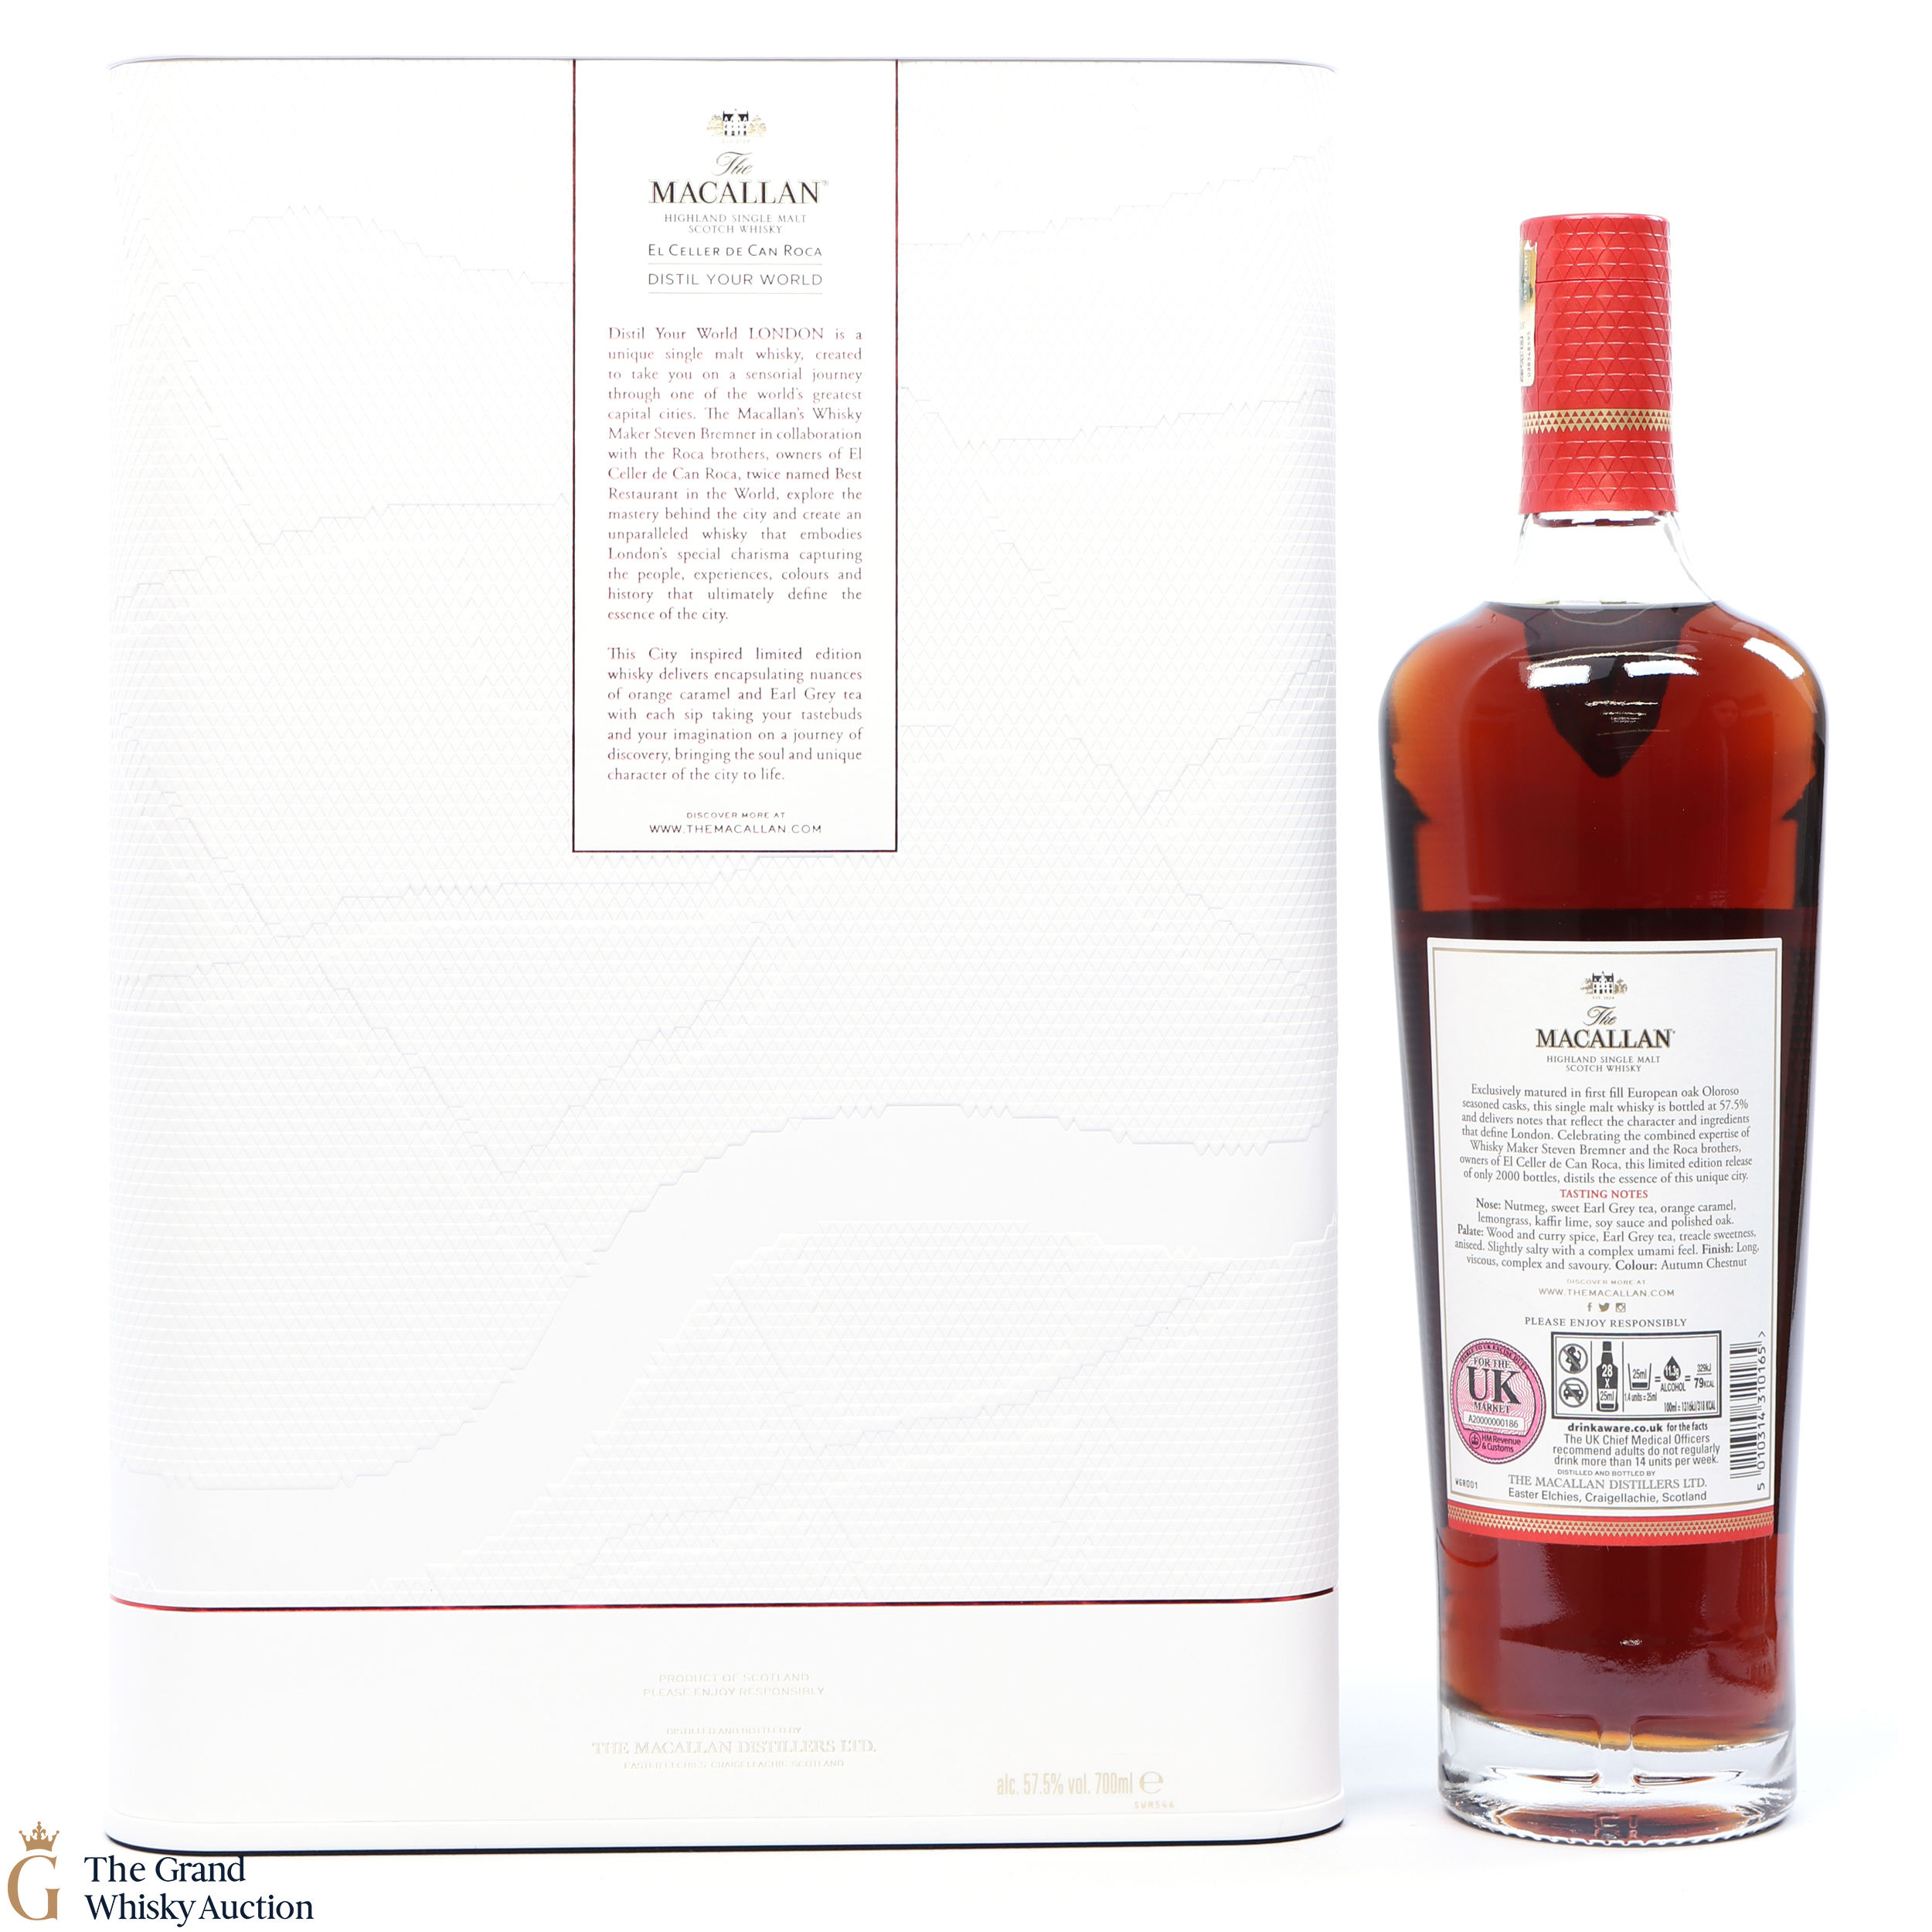 Macallan Distil Your World The London Edition Auction The Grand Whisky Auction